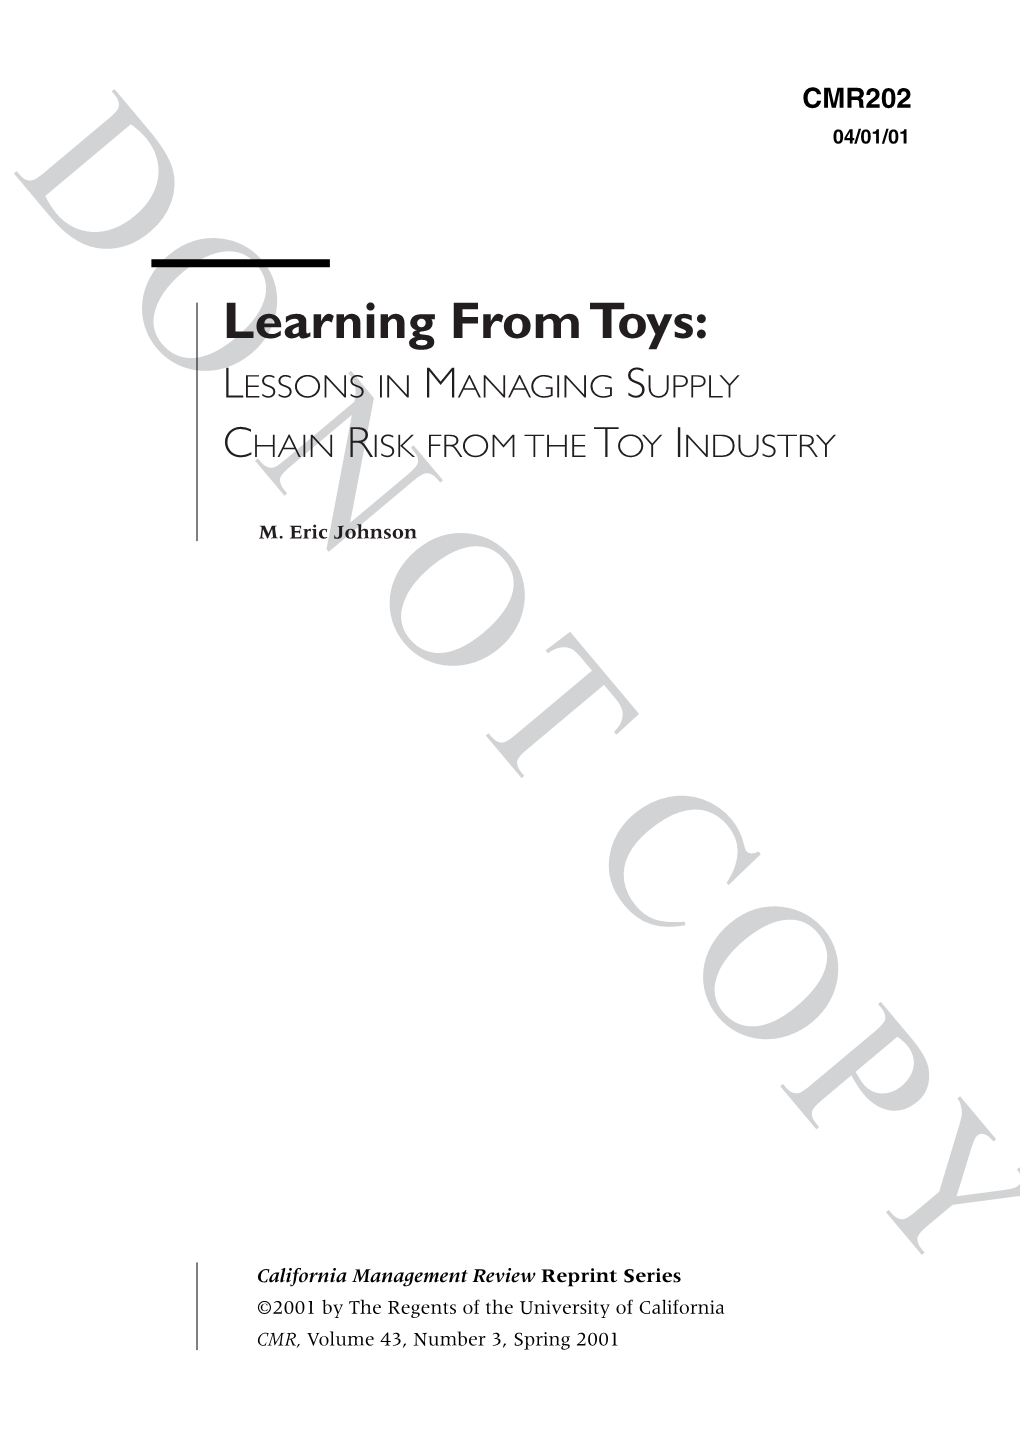 Learning from Toys: LESSONS in MANAGING SUPPLY CHAIN RISK from the TOY INDUSTRY